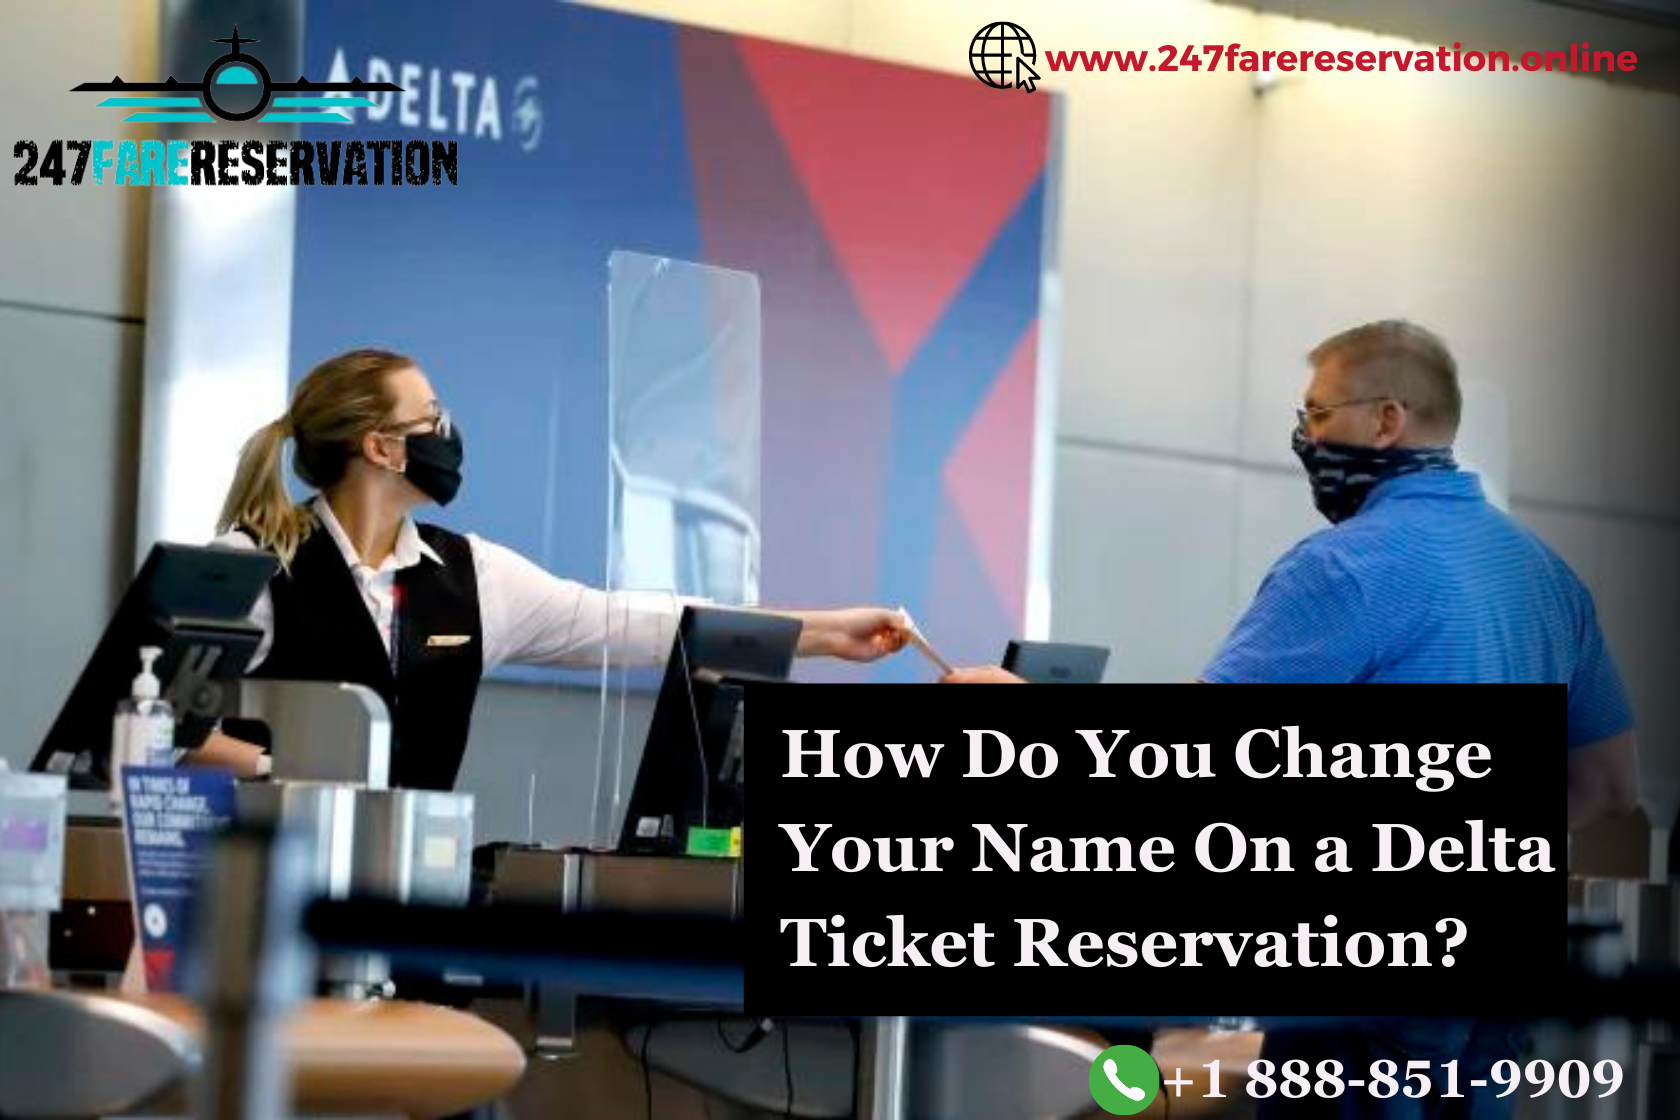 How Do You Change Your Name On a Delta Ticket Reservation? » 247farereservation - Latest News & Blogs